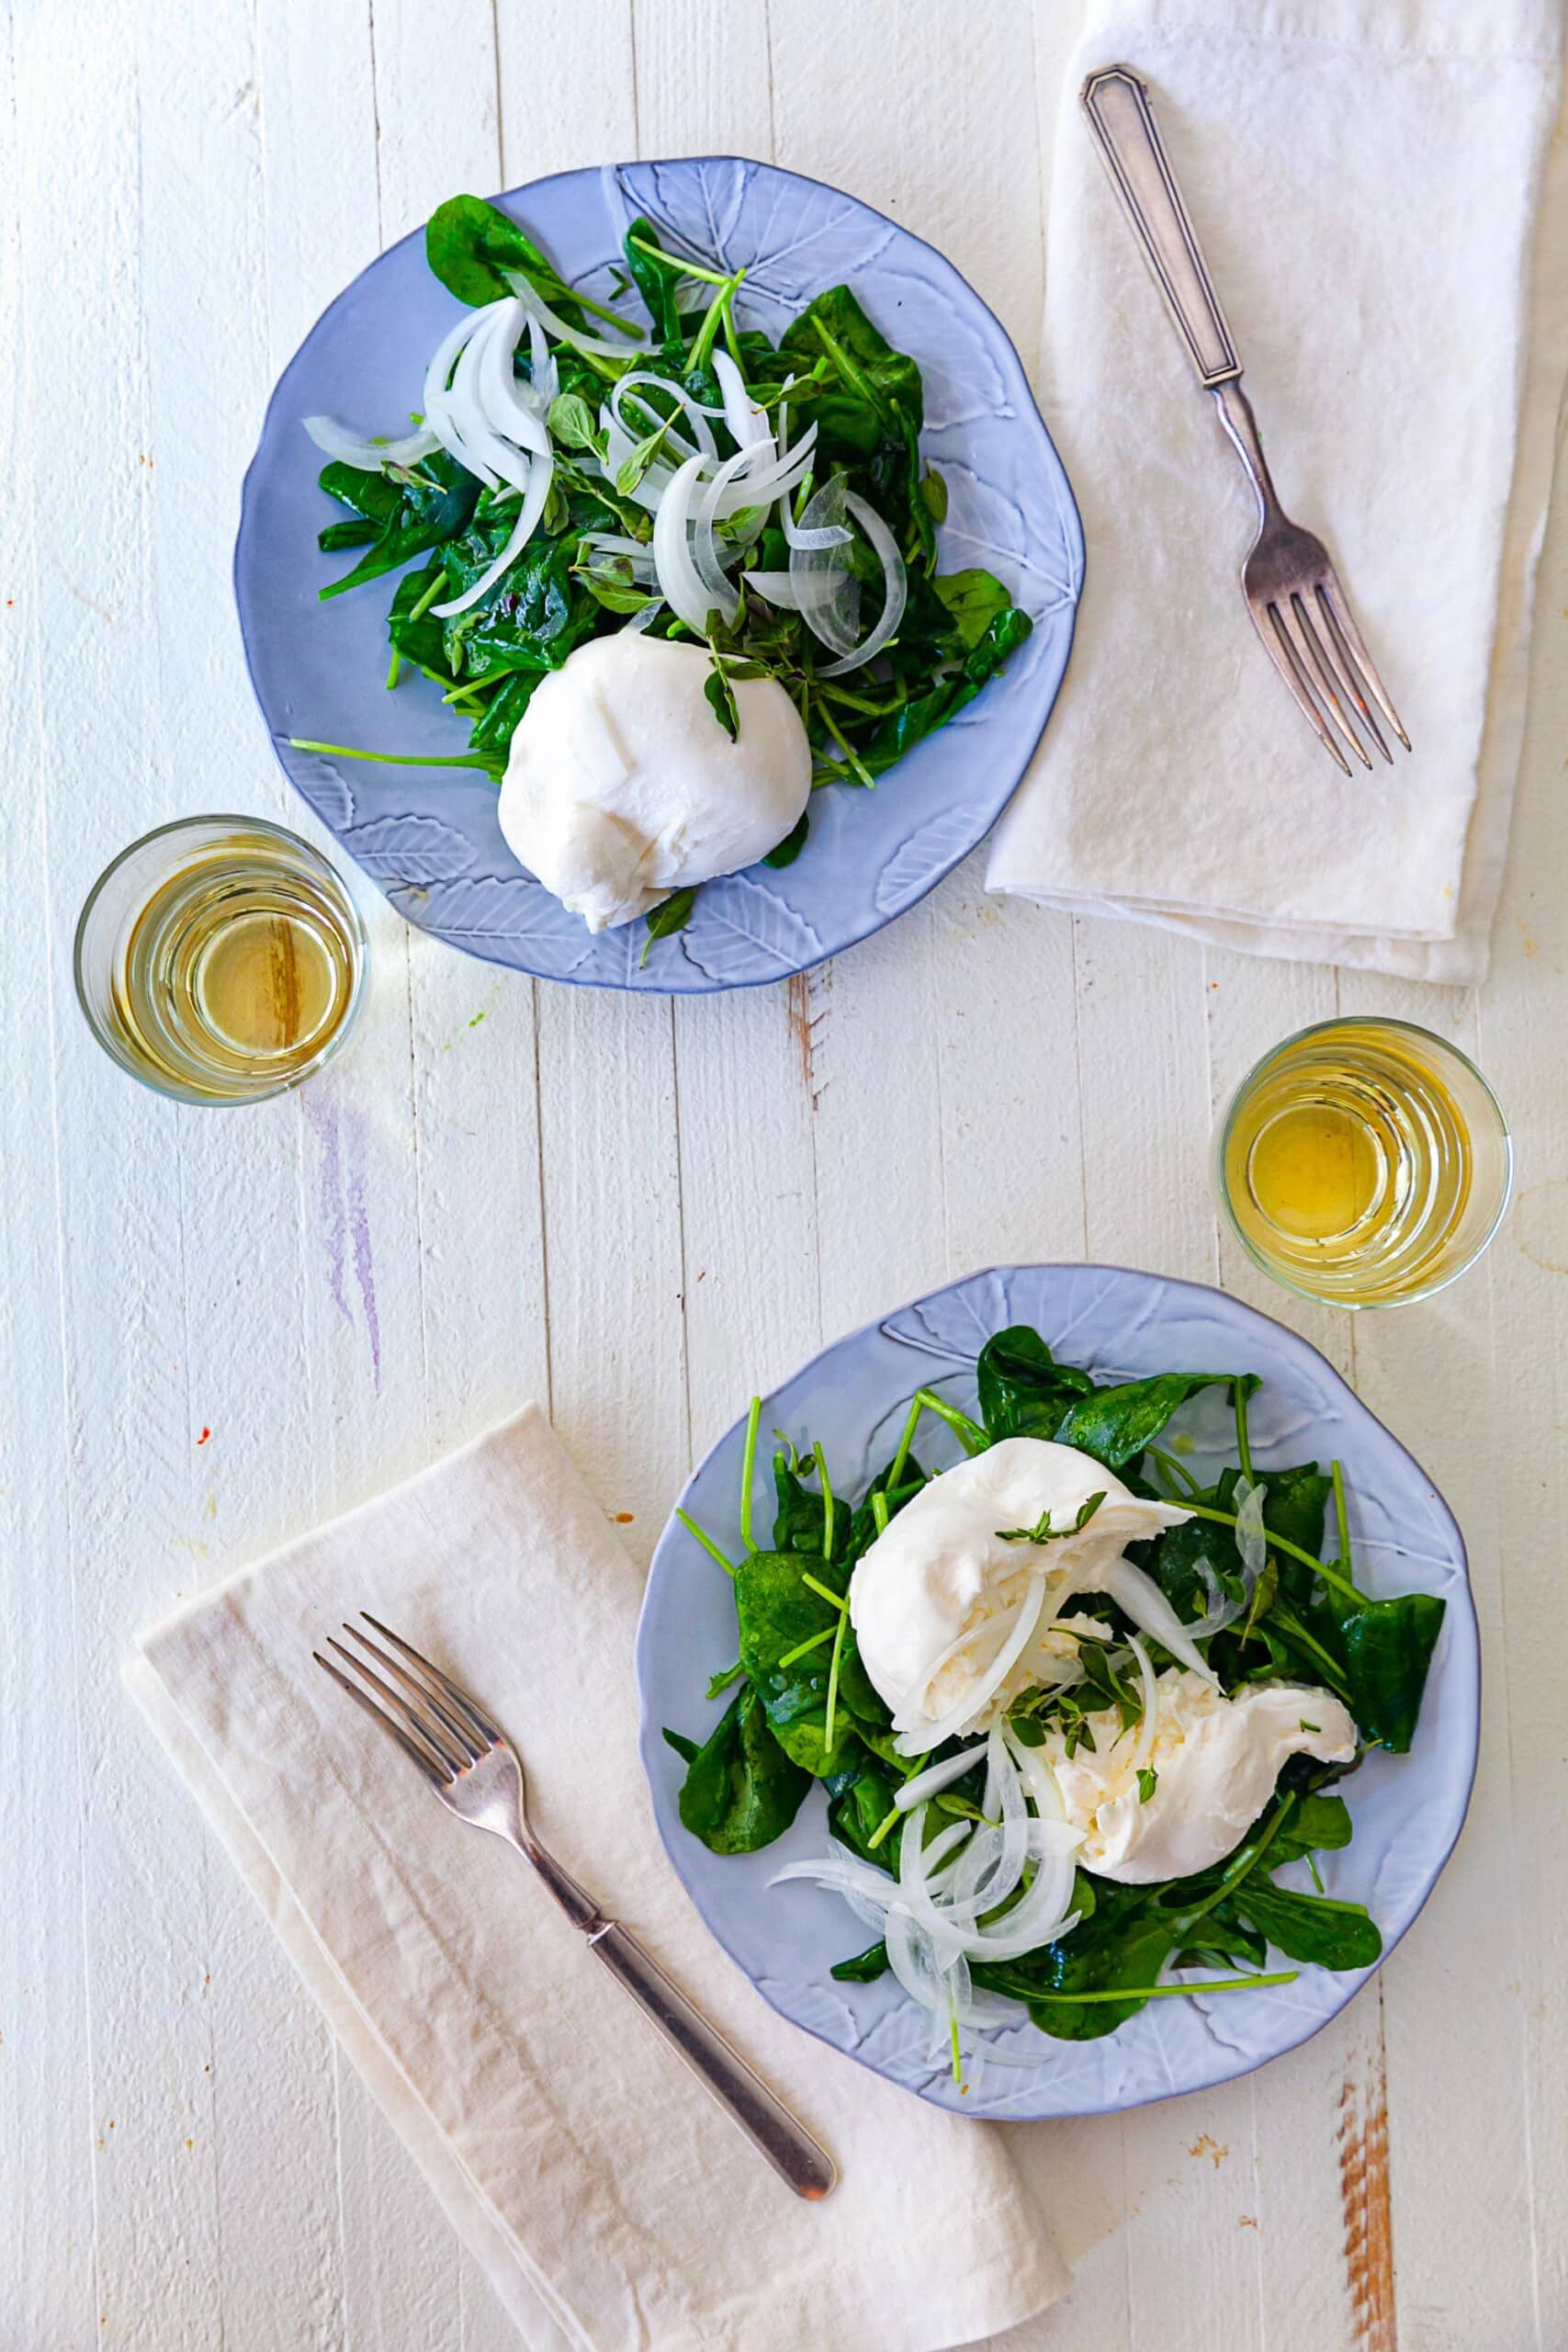 Spinach Salad with Burrata cheese on blue plates.